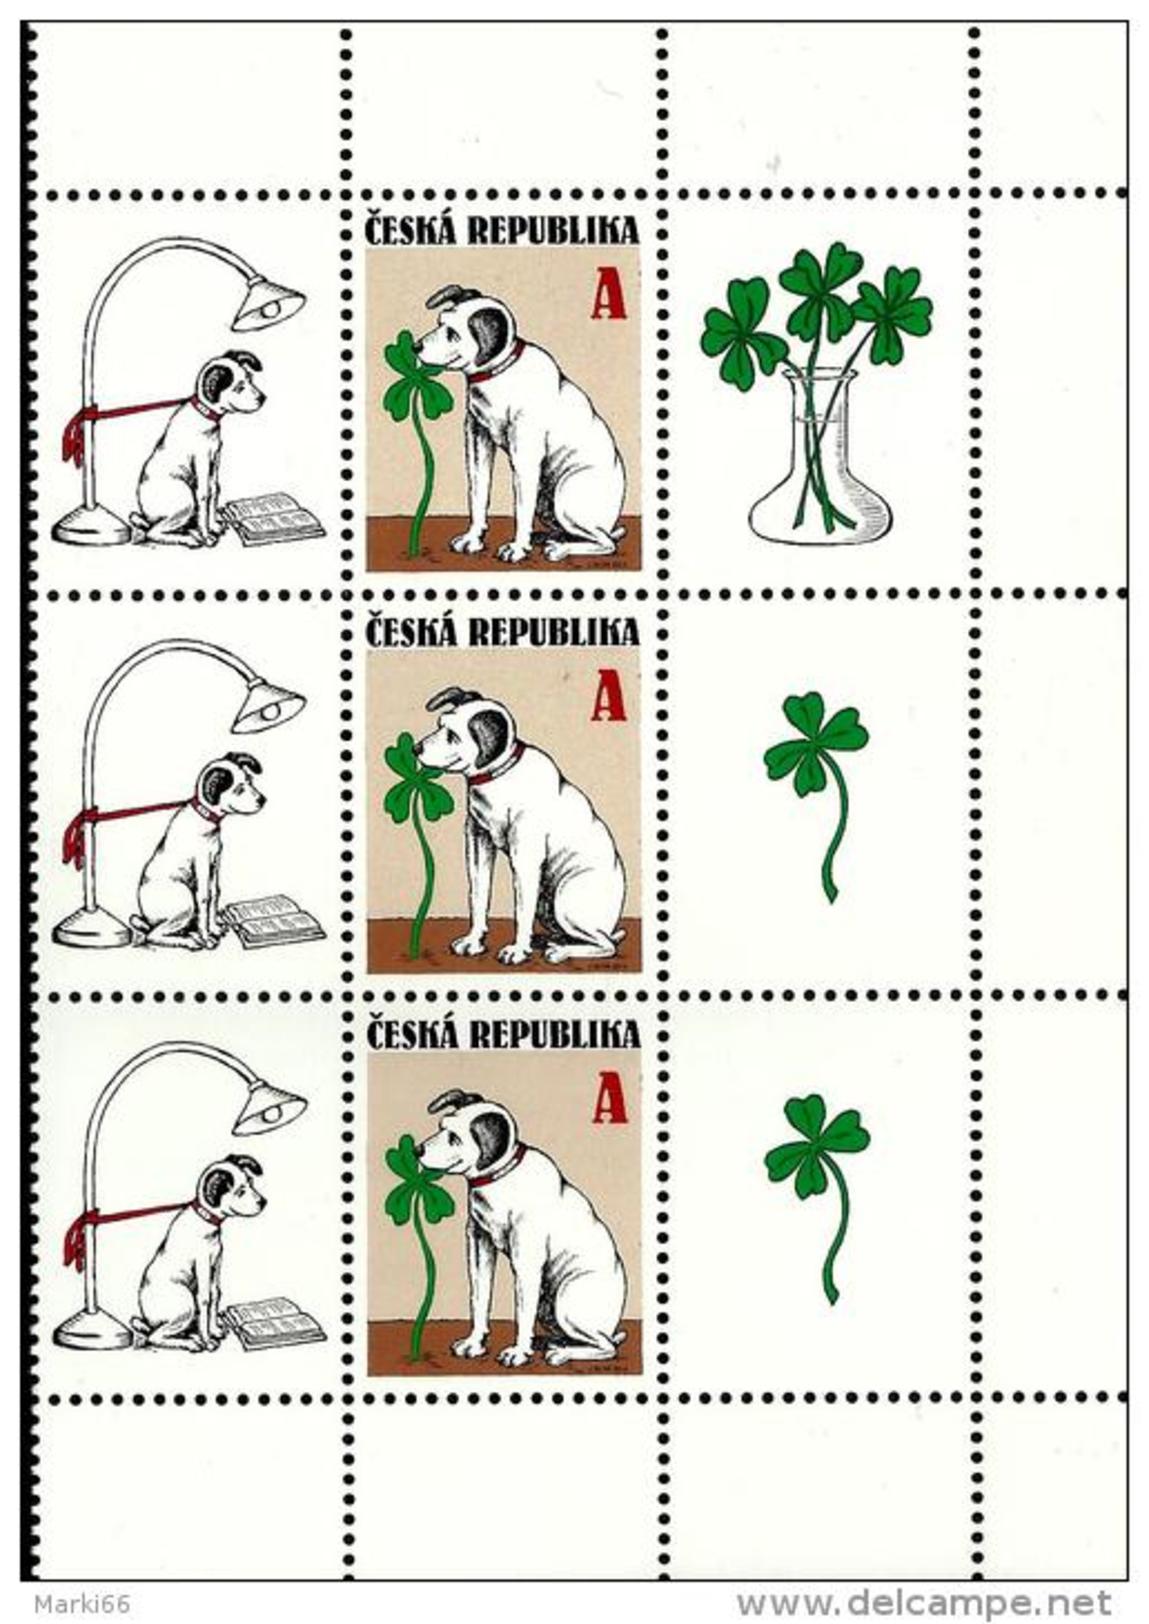 Czech Republic - 2014 - Good Luck Charm - Mint Stamp Block With Different Personalized Coupons - Unused Stamps